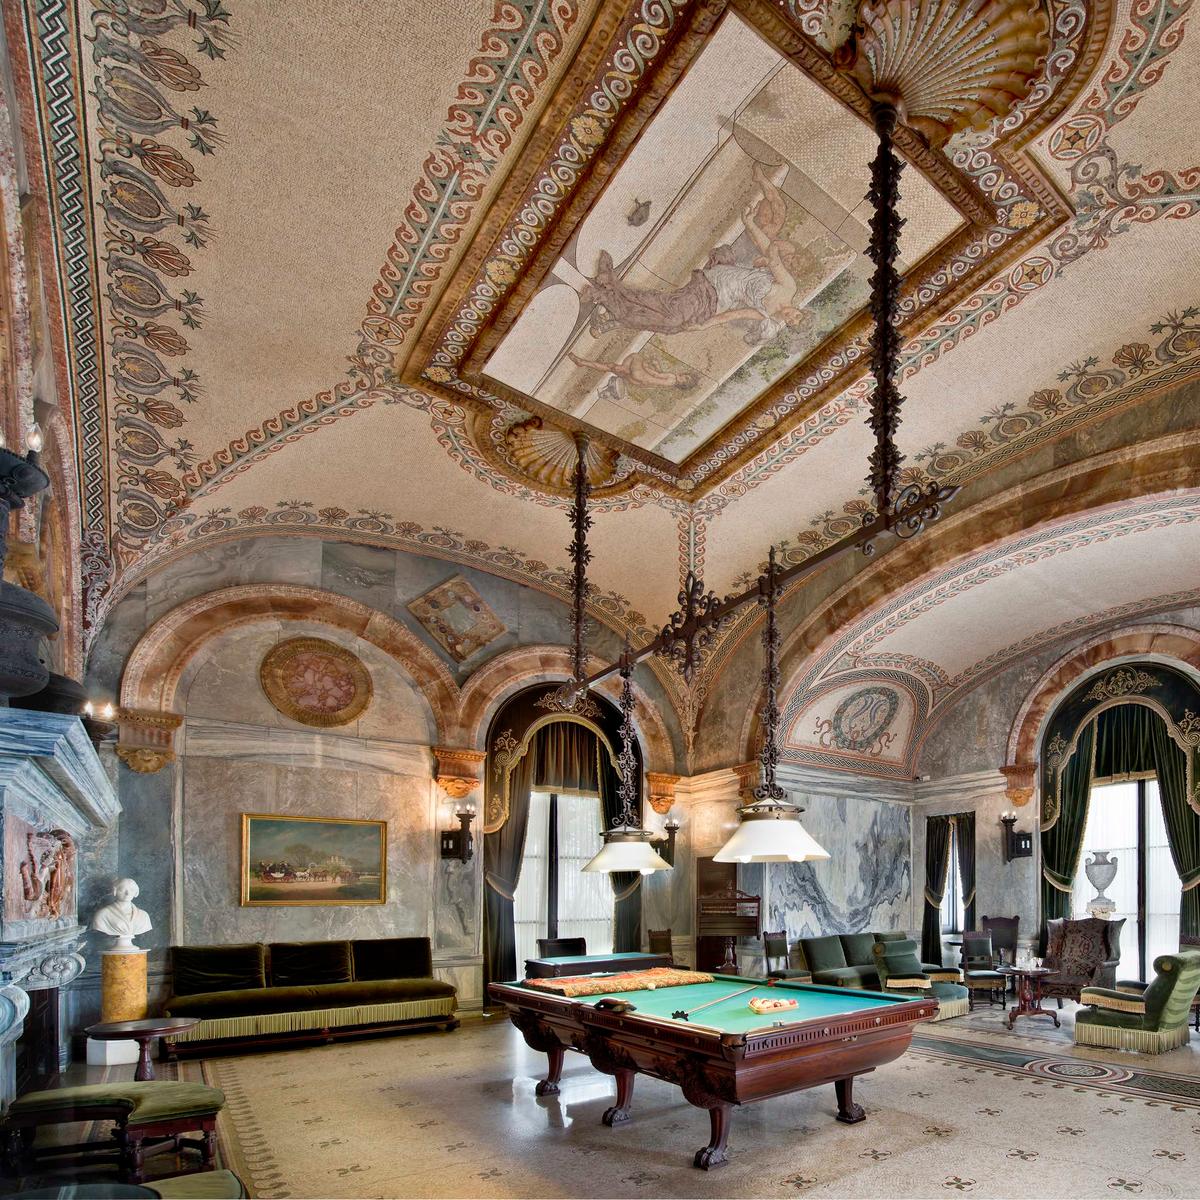 Designed by Richard Morris in the style of ancient Rome, the walls of the Billiard Room are constructed from slabs of Italian cippolino marble with rose alabaster arches. Semi-precious stones create mosaics. The Billiard Room was featured in the second episode of “The Gilded Age” series on HBO. (Courtesy of The Preservation Society of Newport County)